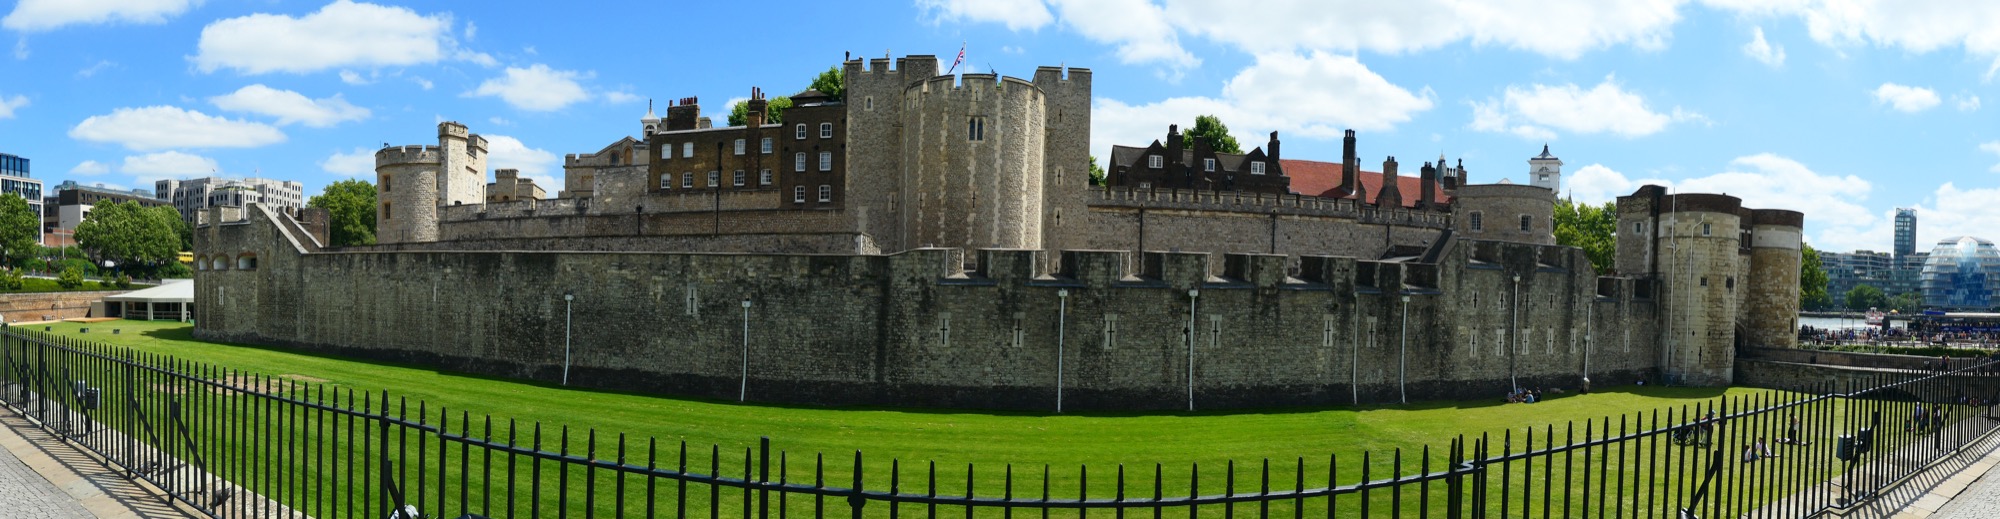 Panorama of the Tower of London.